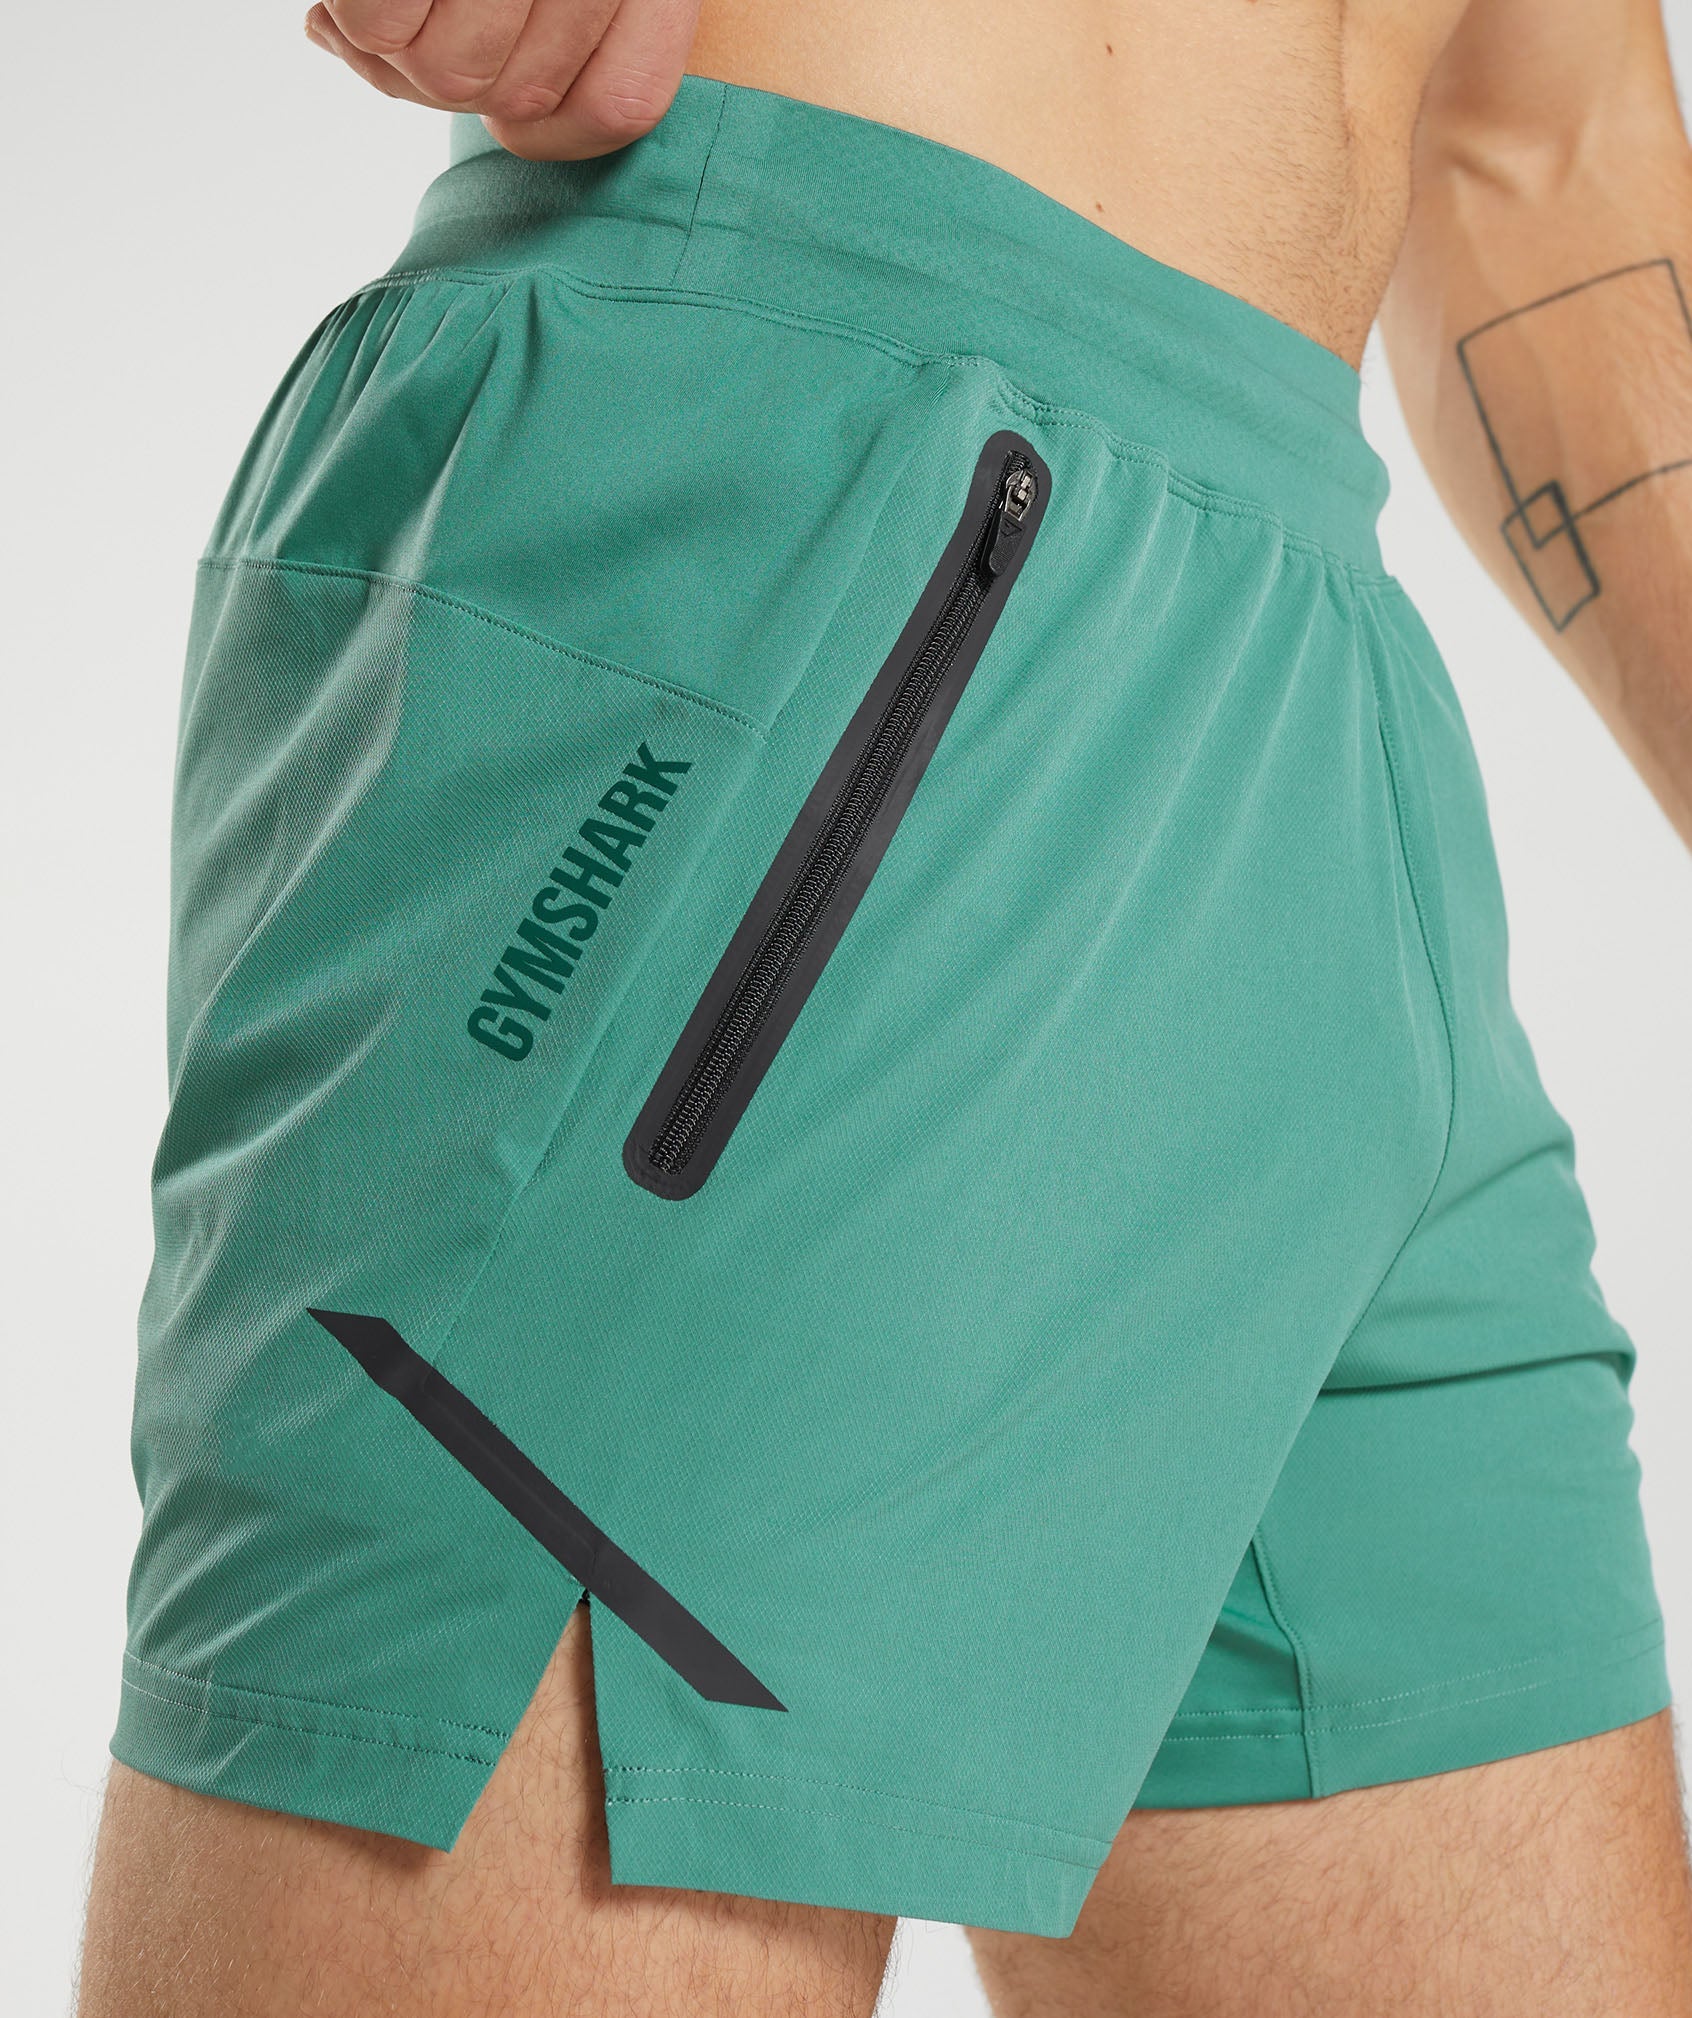 Apex 5" Perform Shorts in Hoya Green - view 6